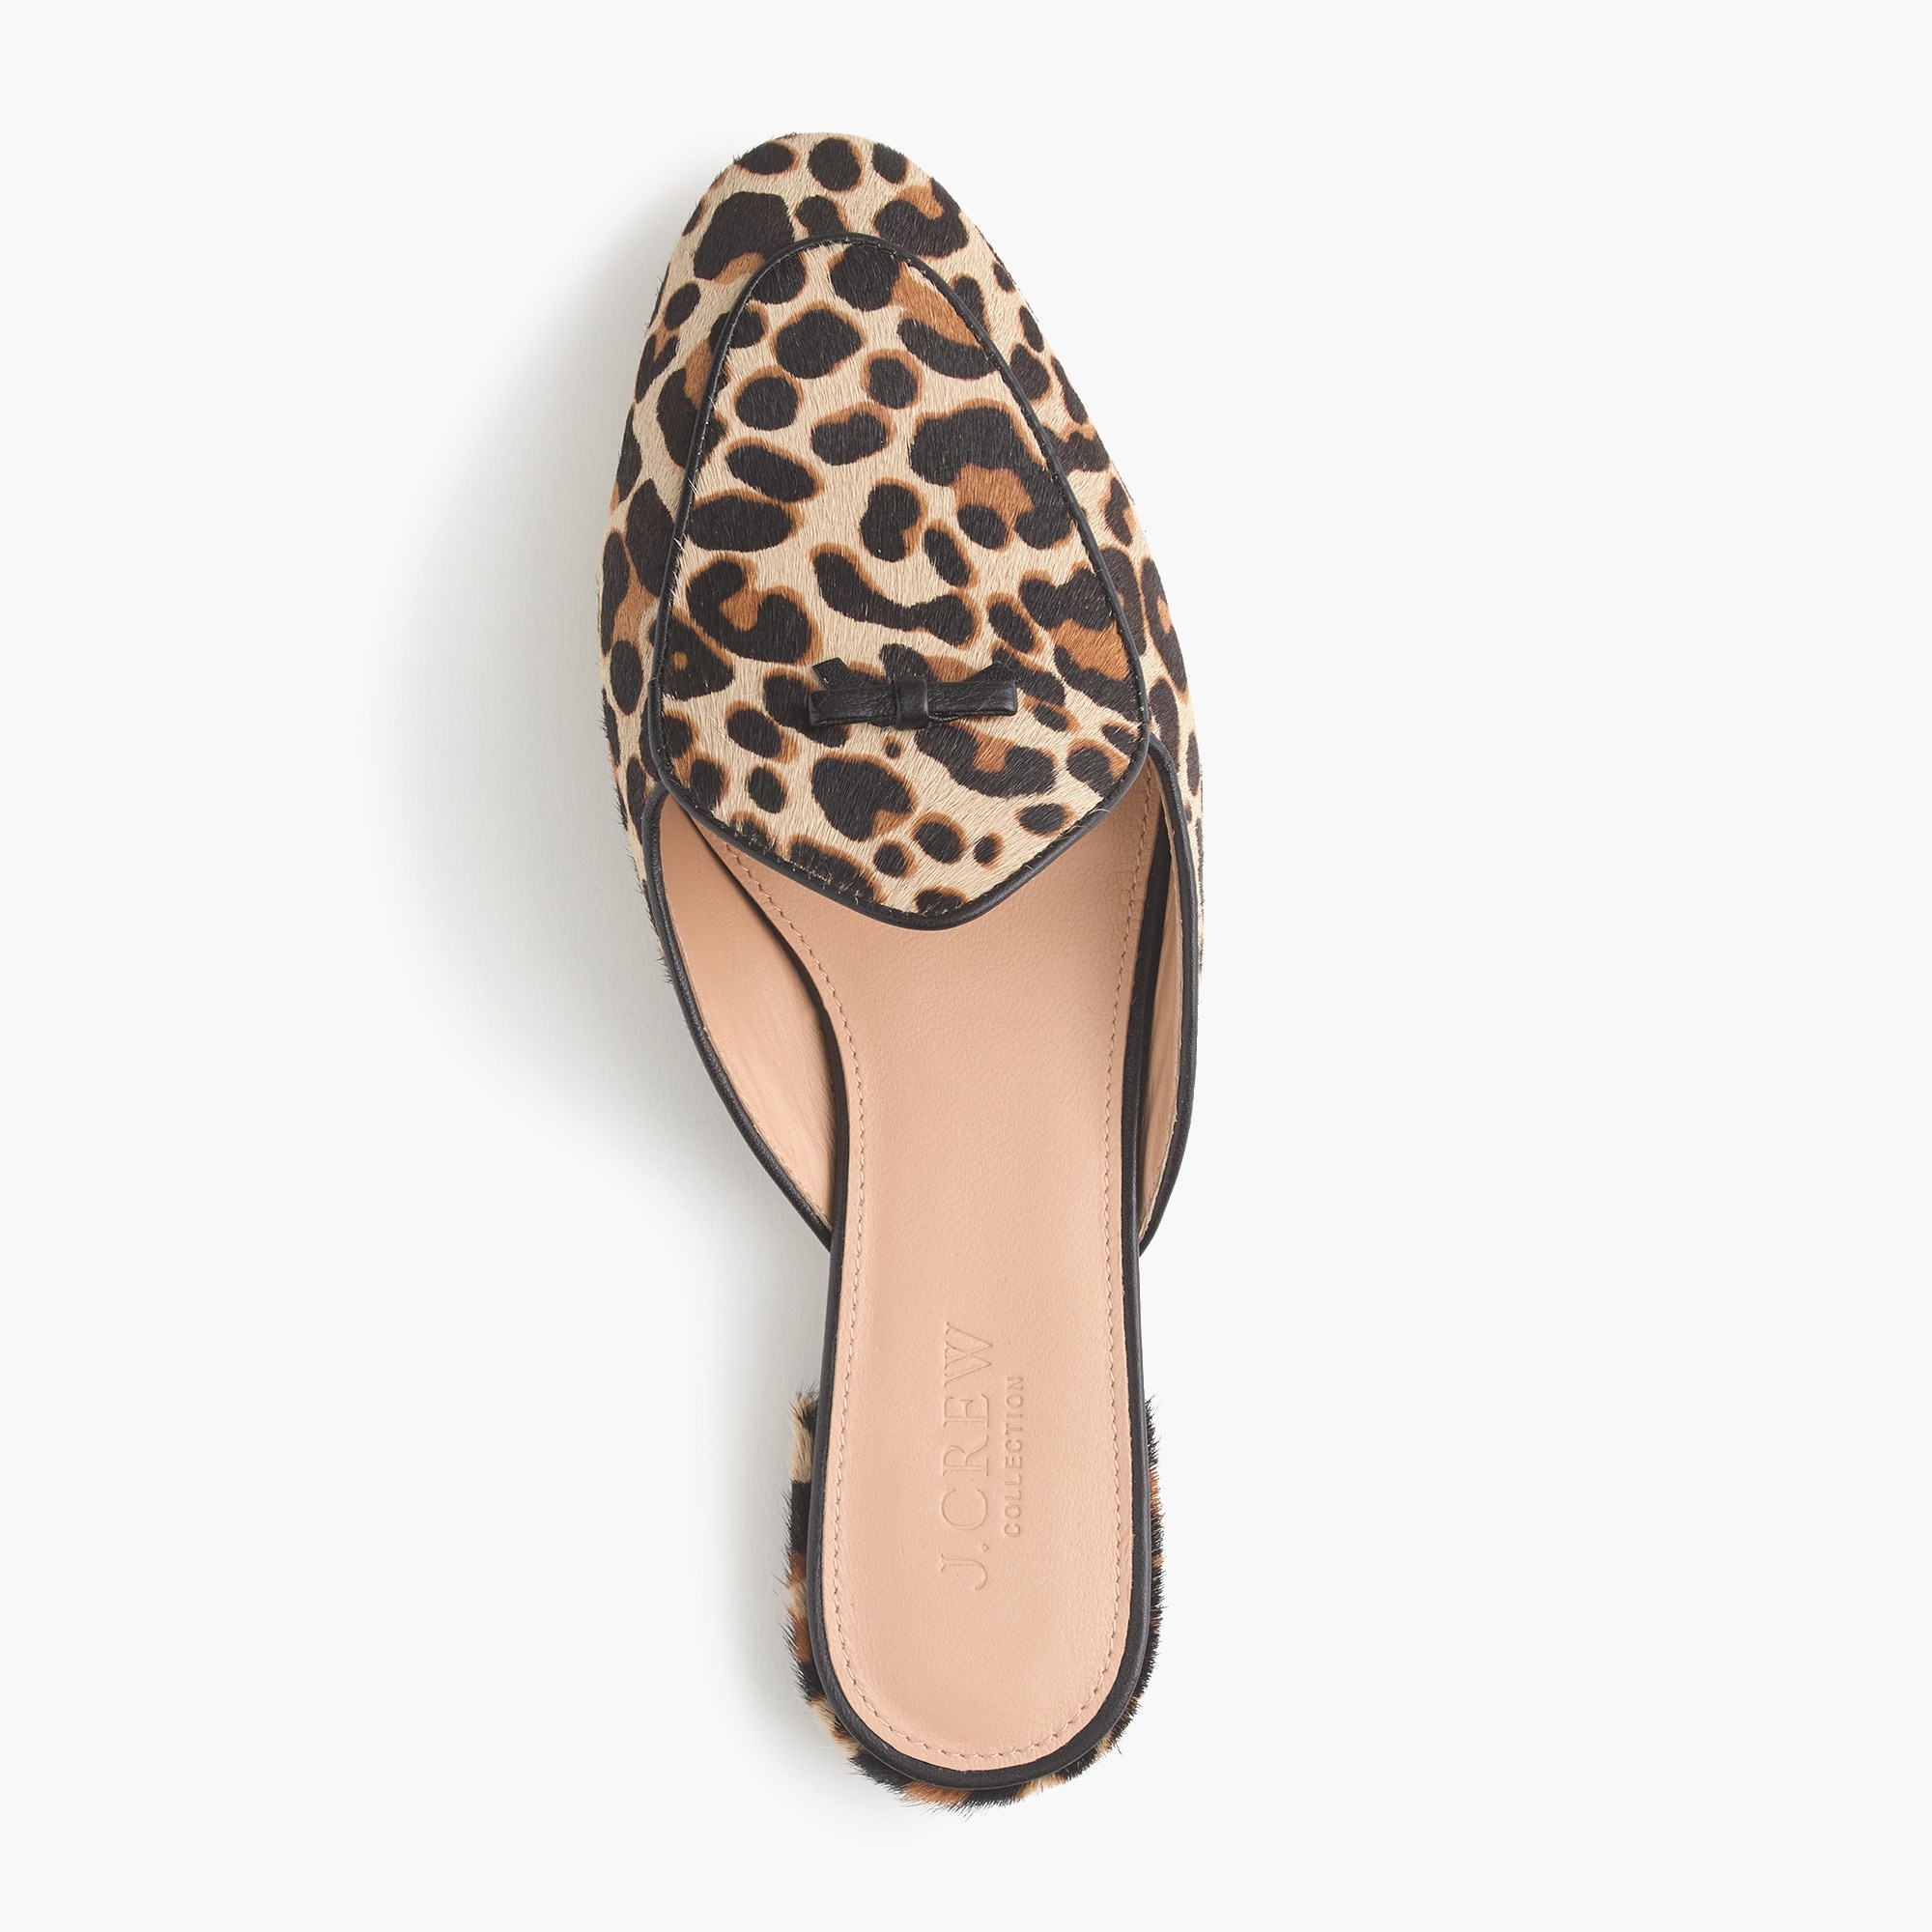 J.Crew: Piped Loafer Mules In Calf Hair For Women